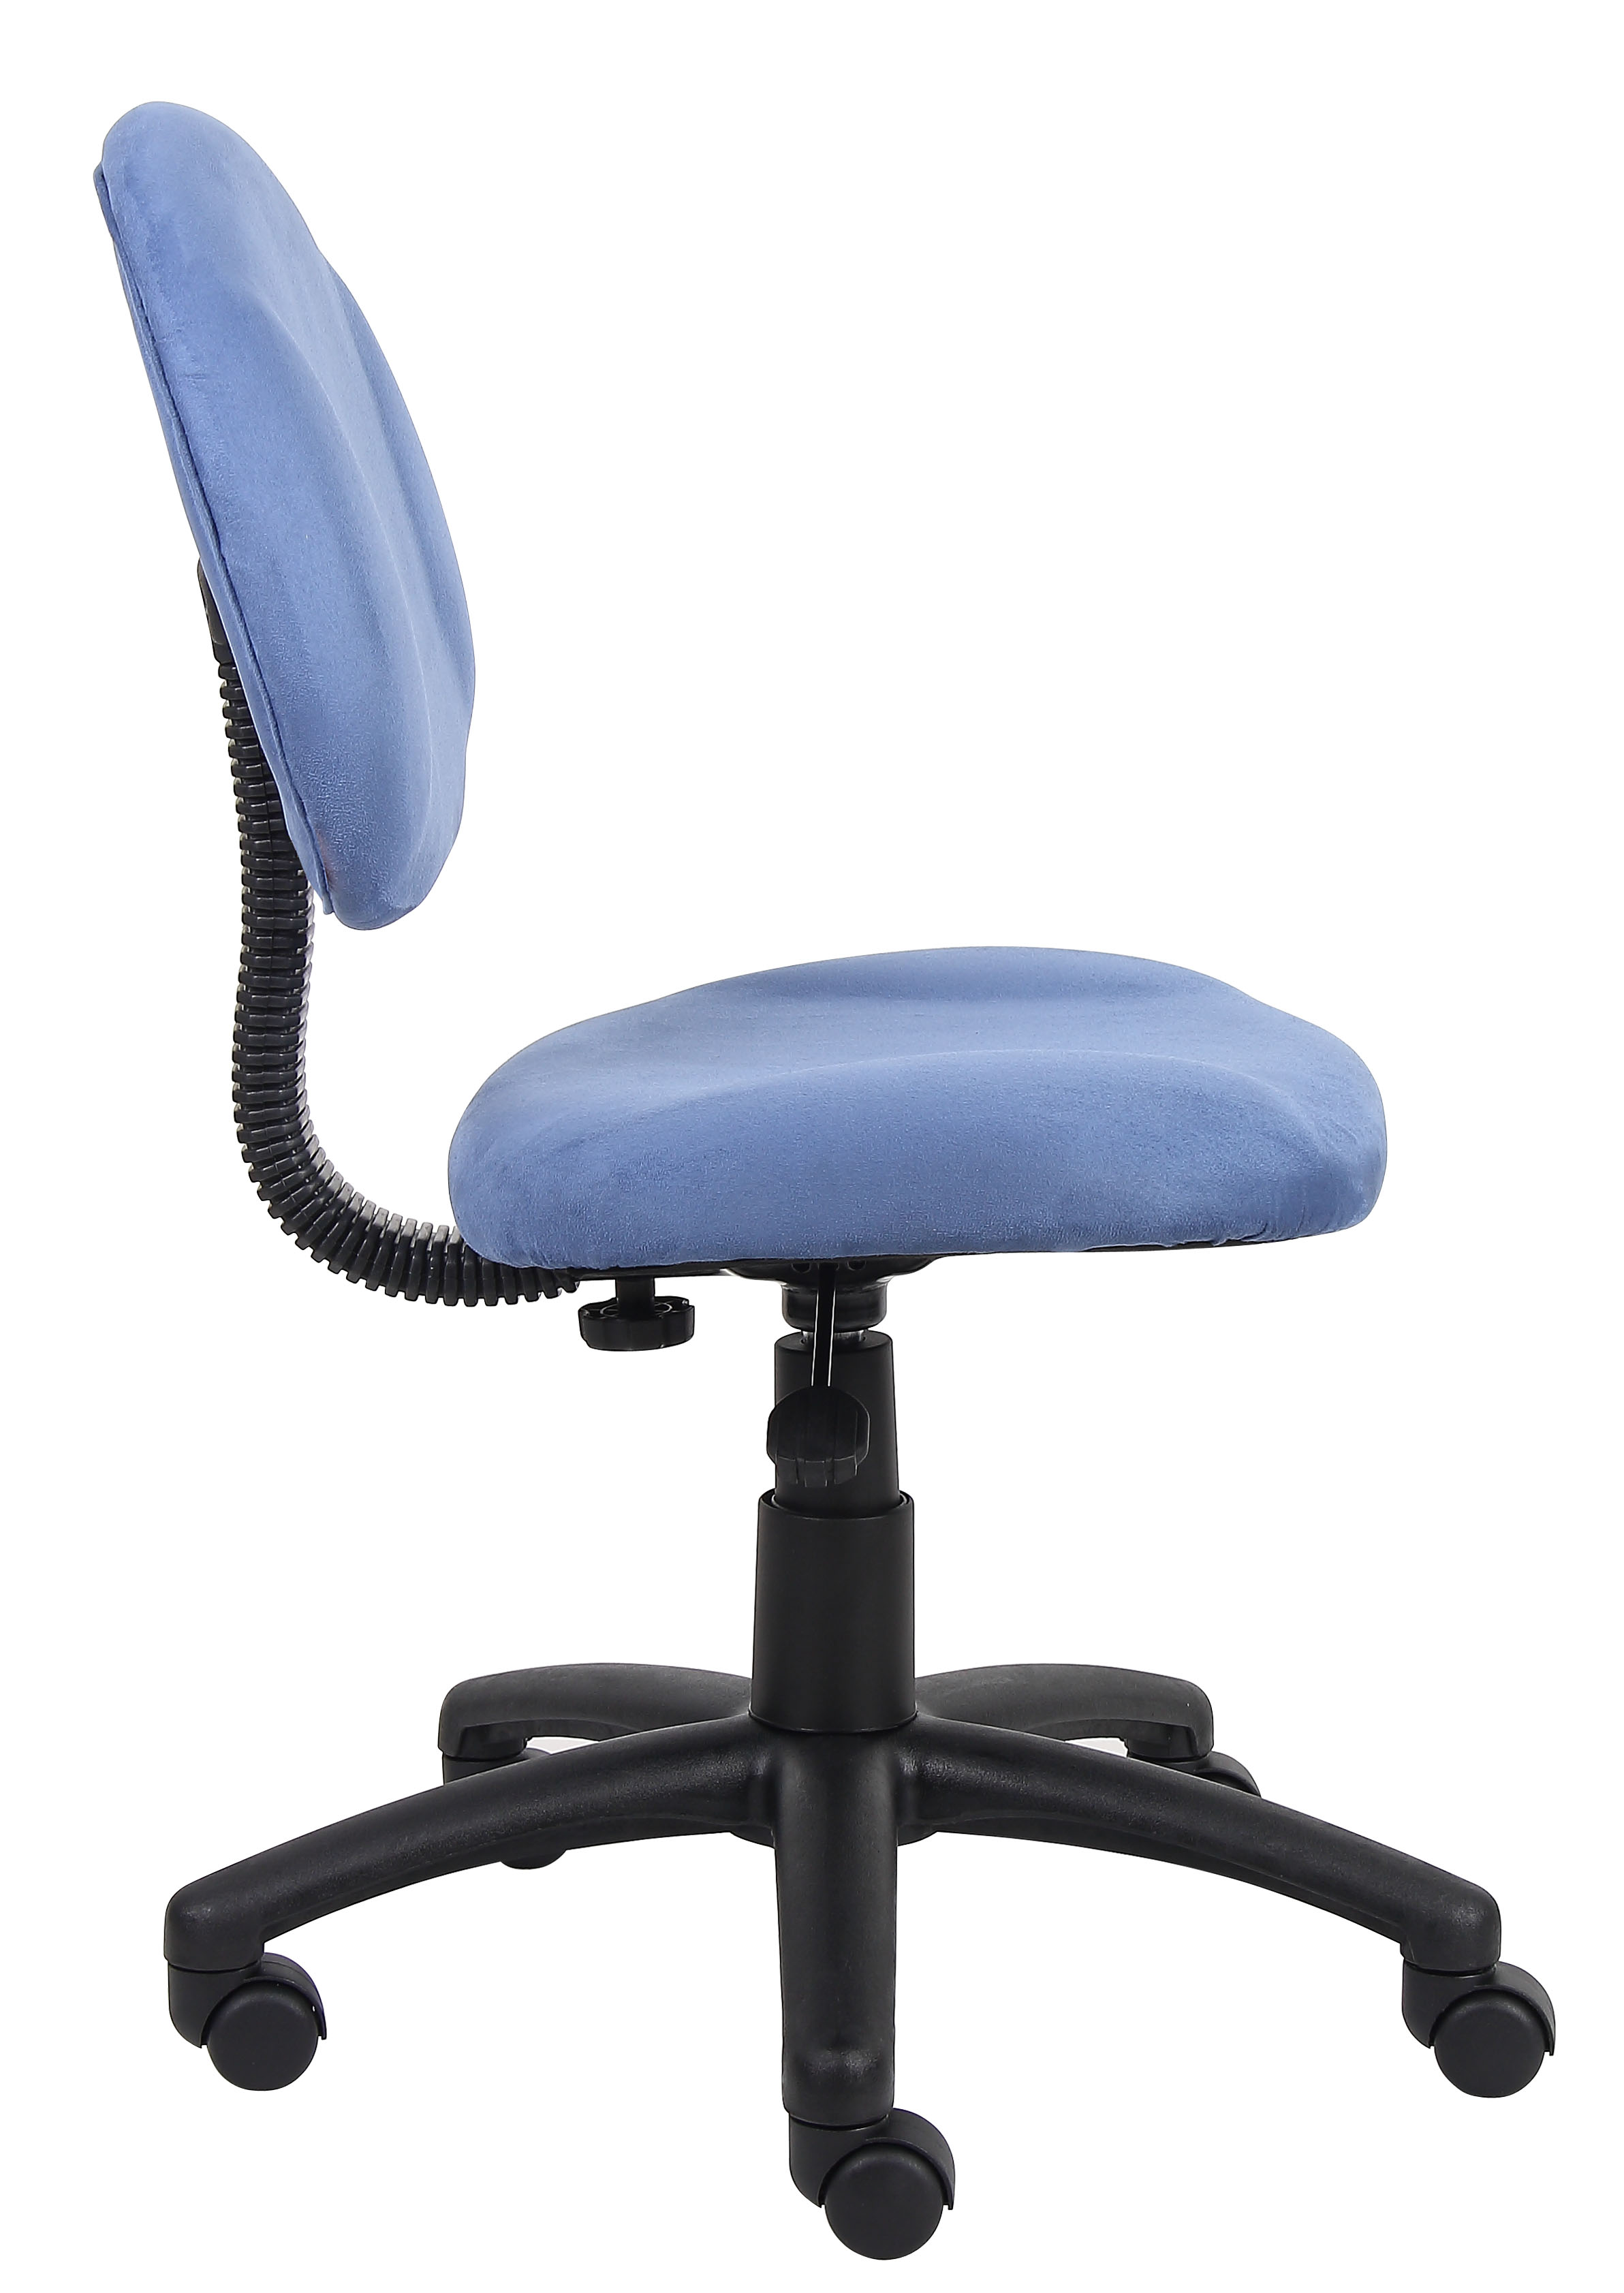 Boss Office Products B325-BE Perfect Posture Deluxe Modern Home Office Chair without Arms, Blue - image 5 of 6